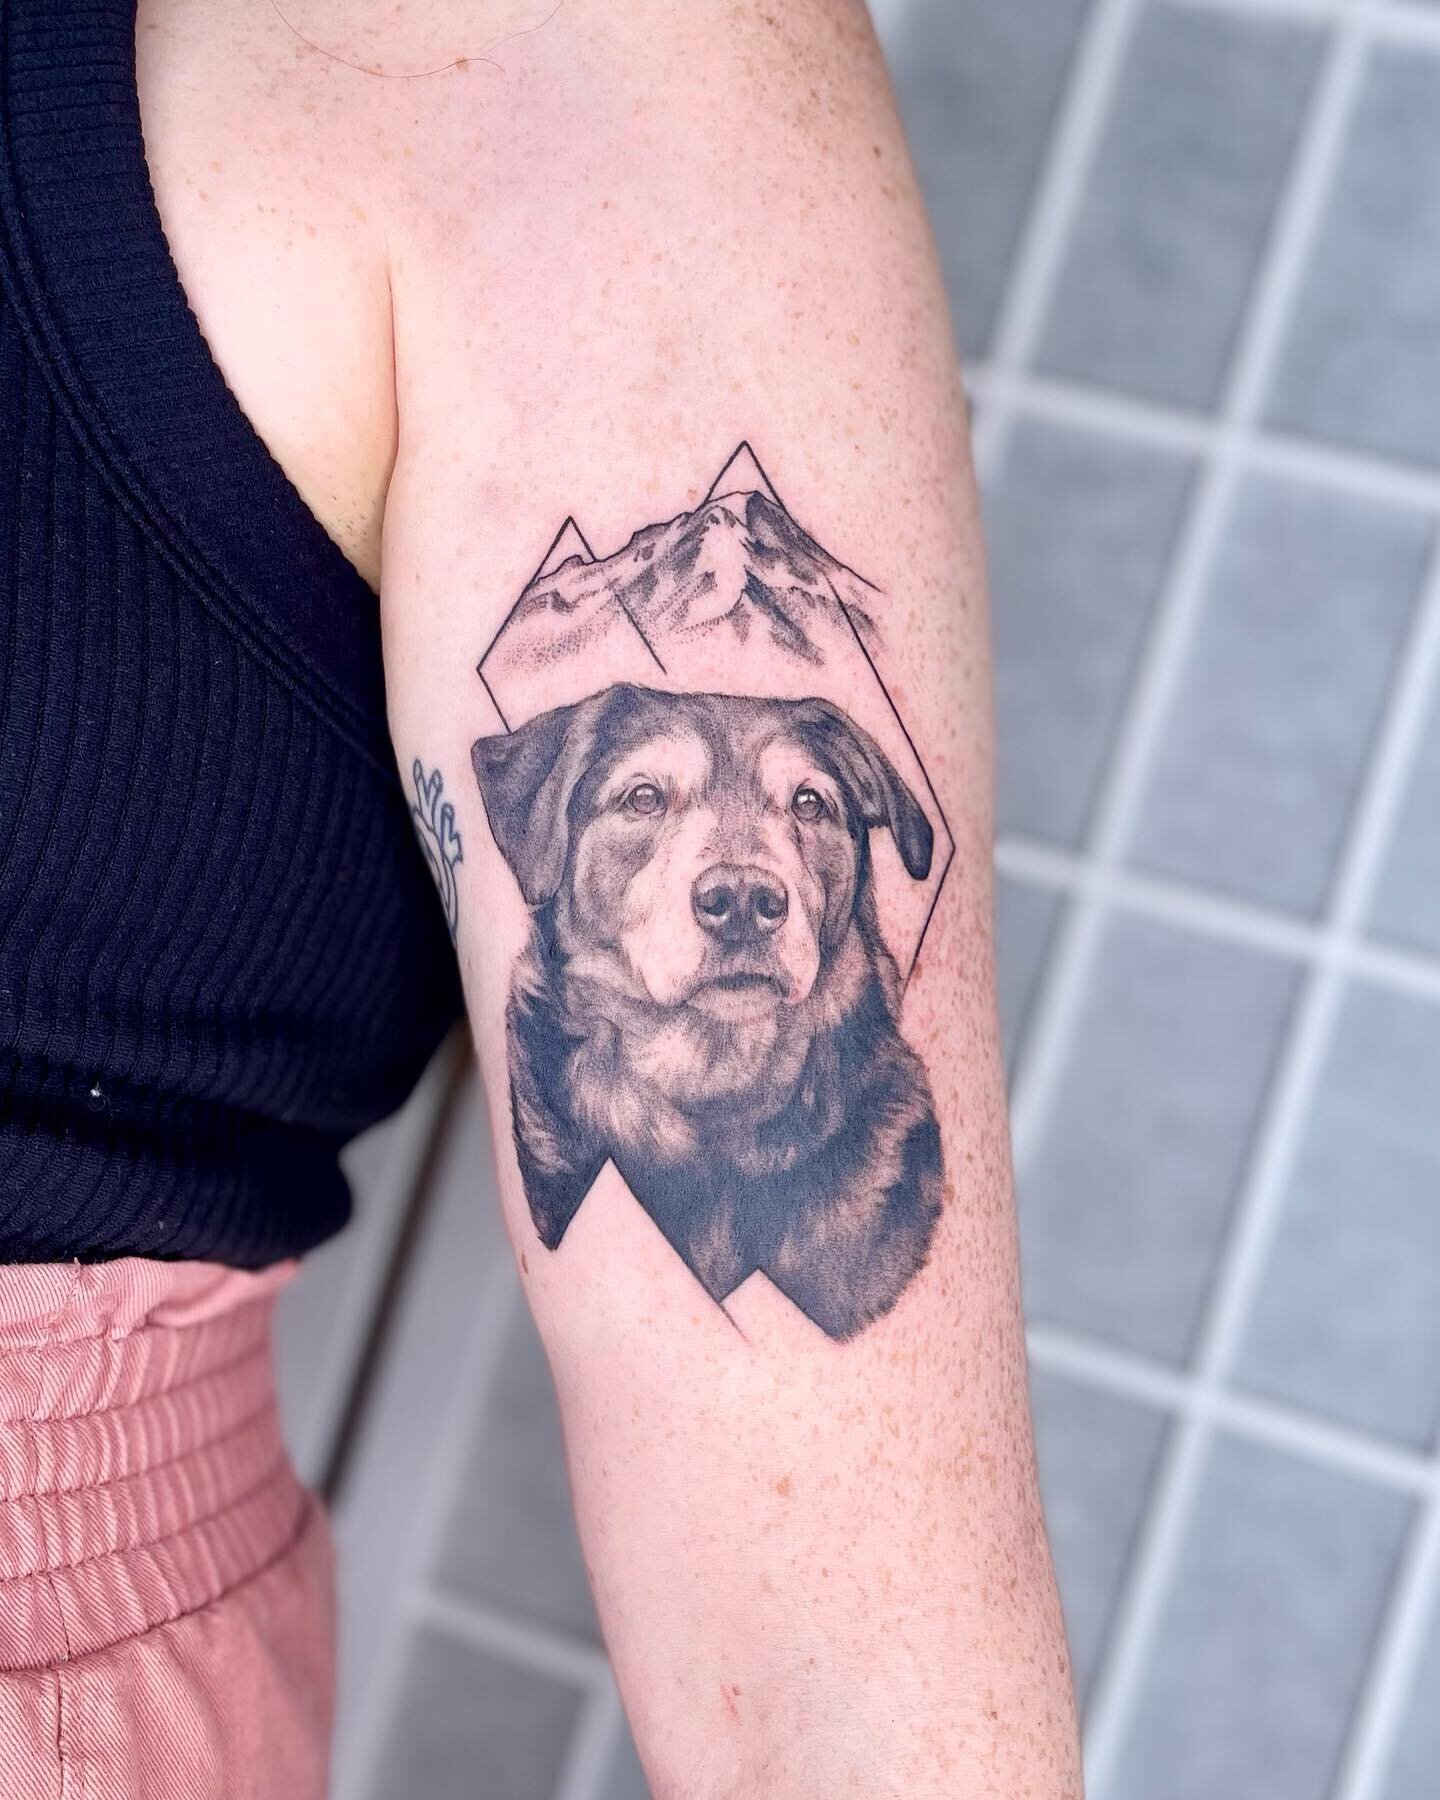 Sweet Old Man 🥹🐶

This good boi is turning 17 in October and has been with his sweet owner Rachel through it all. He was once a wild adventure dog and now enjoys his days relaxing. So grateful to have the opportunity to immortalize him forever next